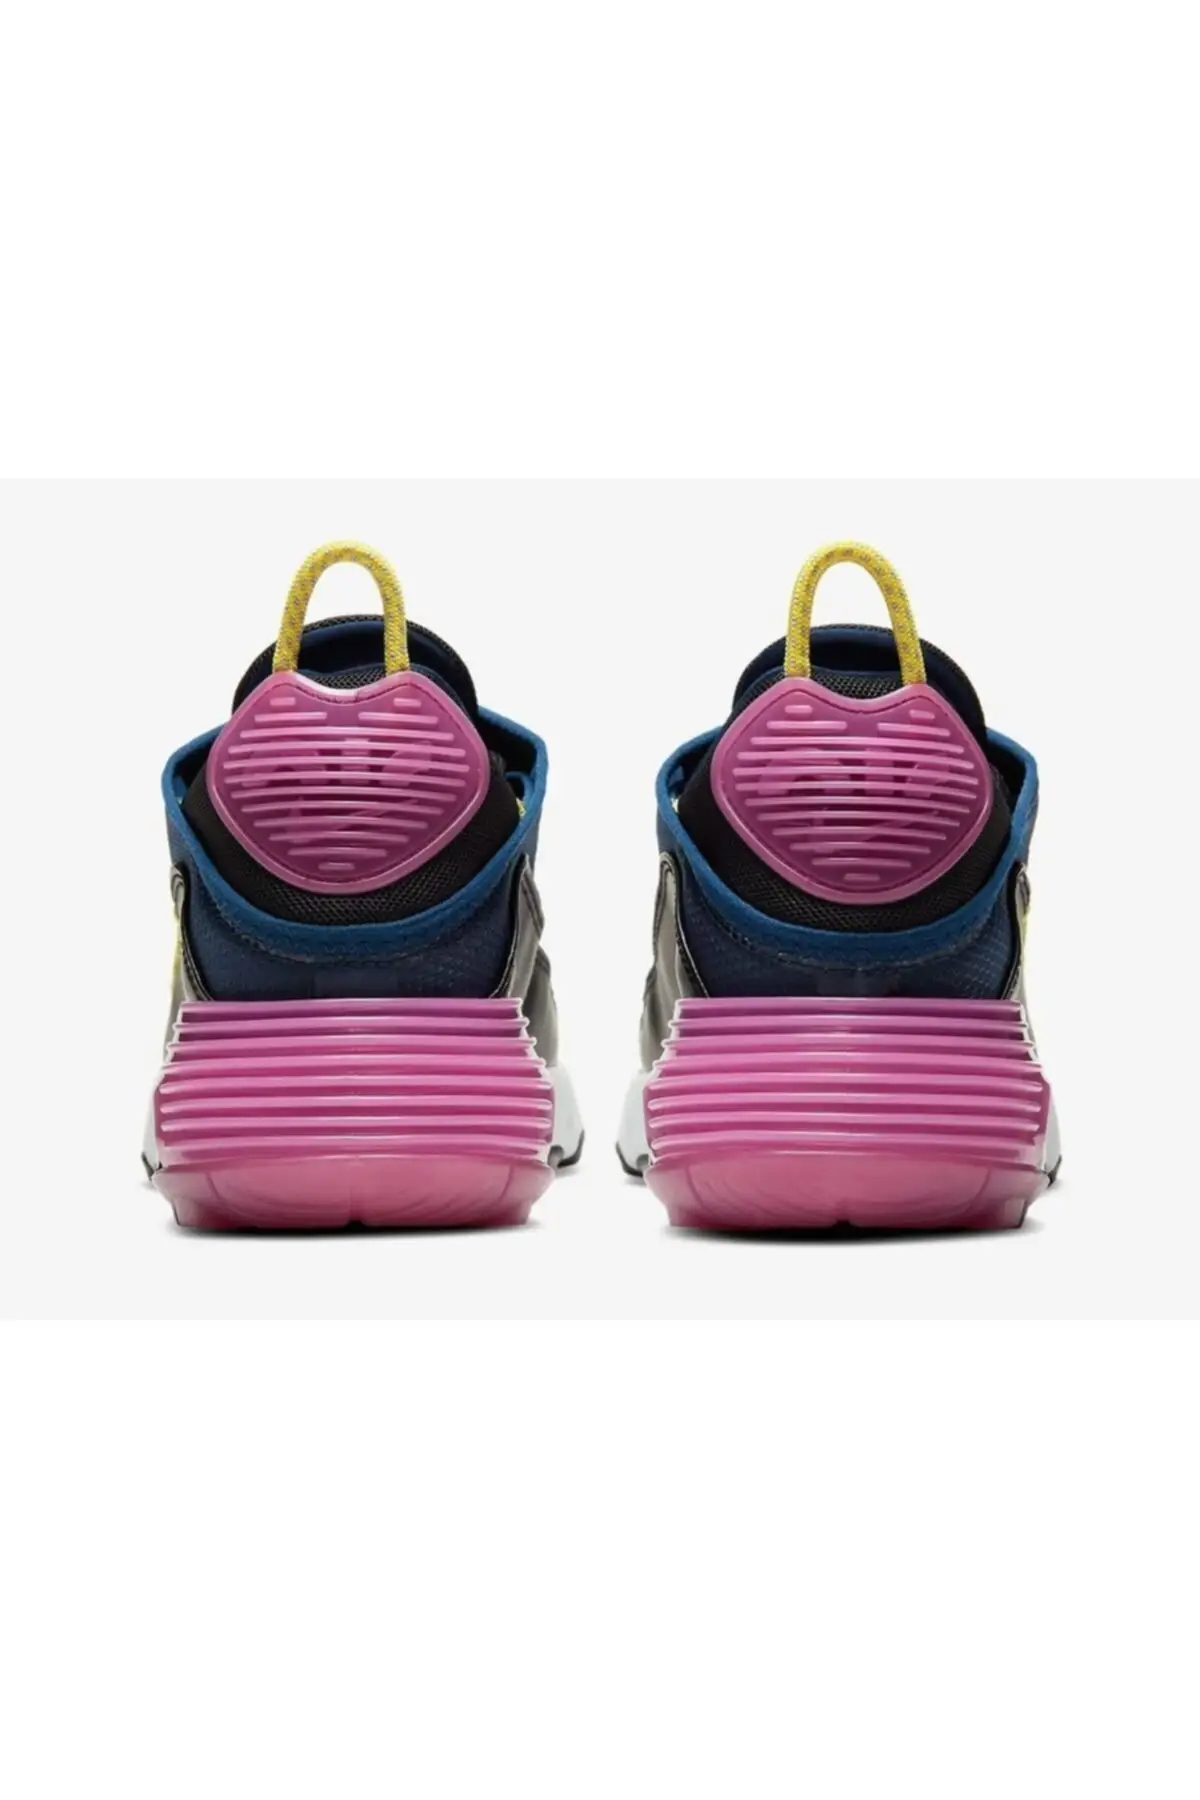 Unleash Your Style with Navy Blue Nike Shoes Women’s插图3